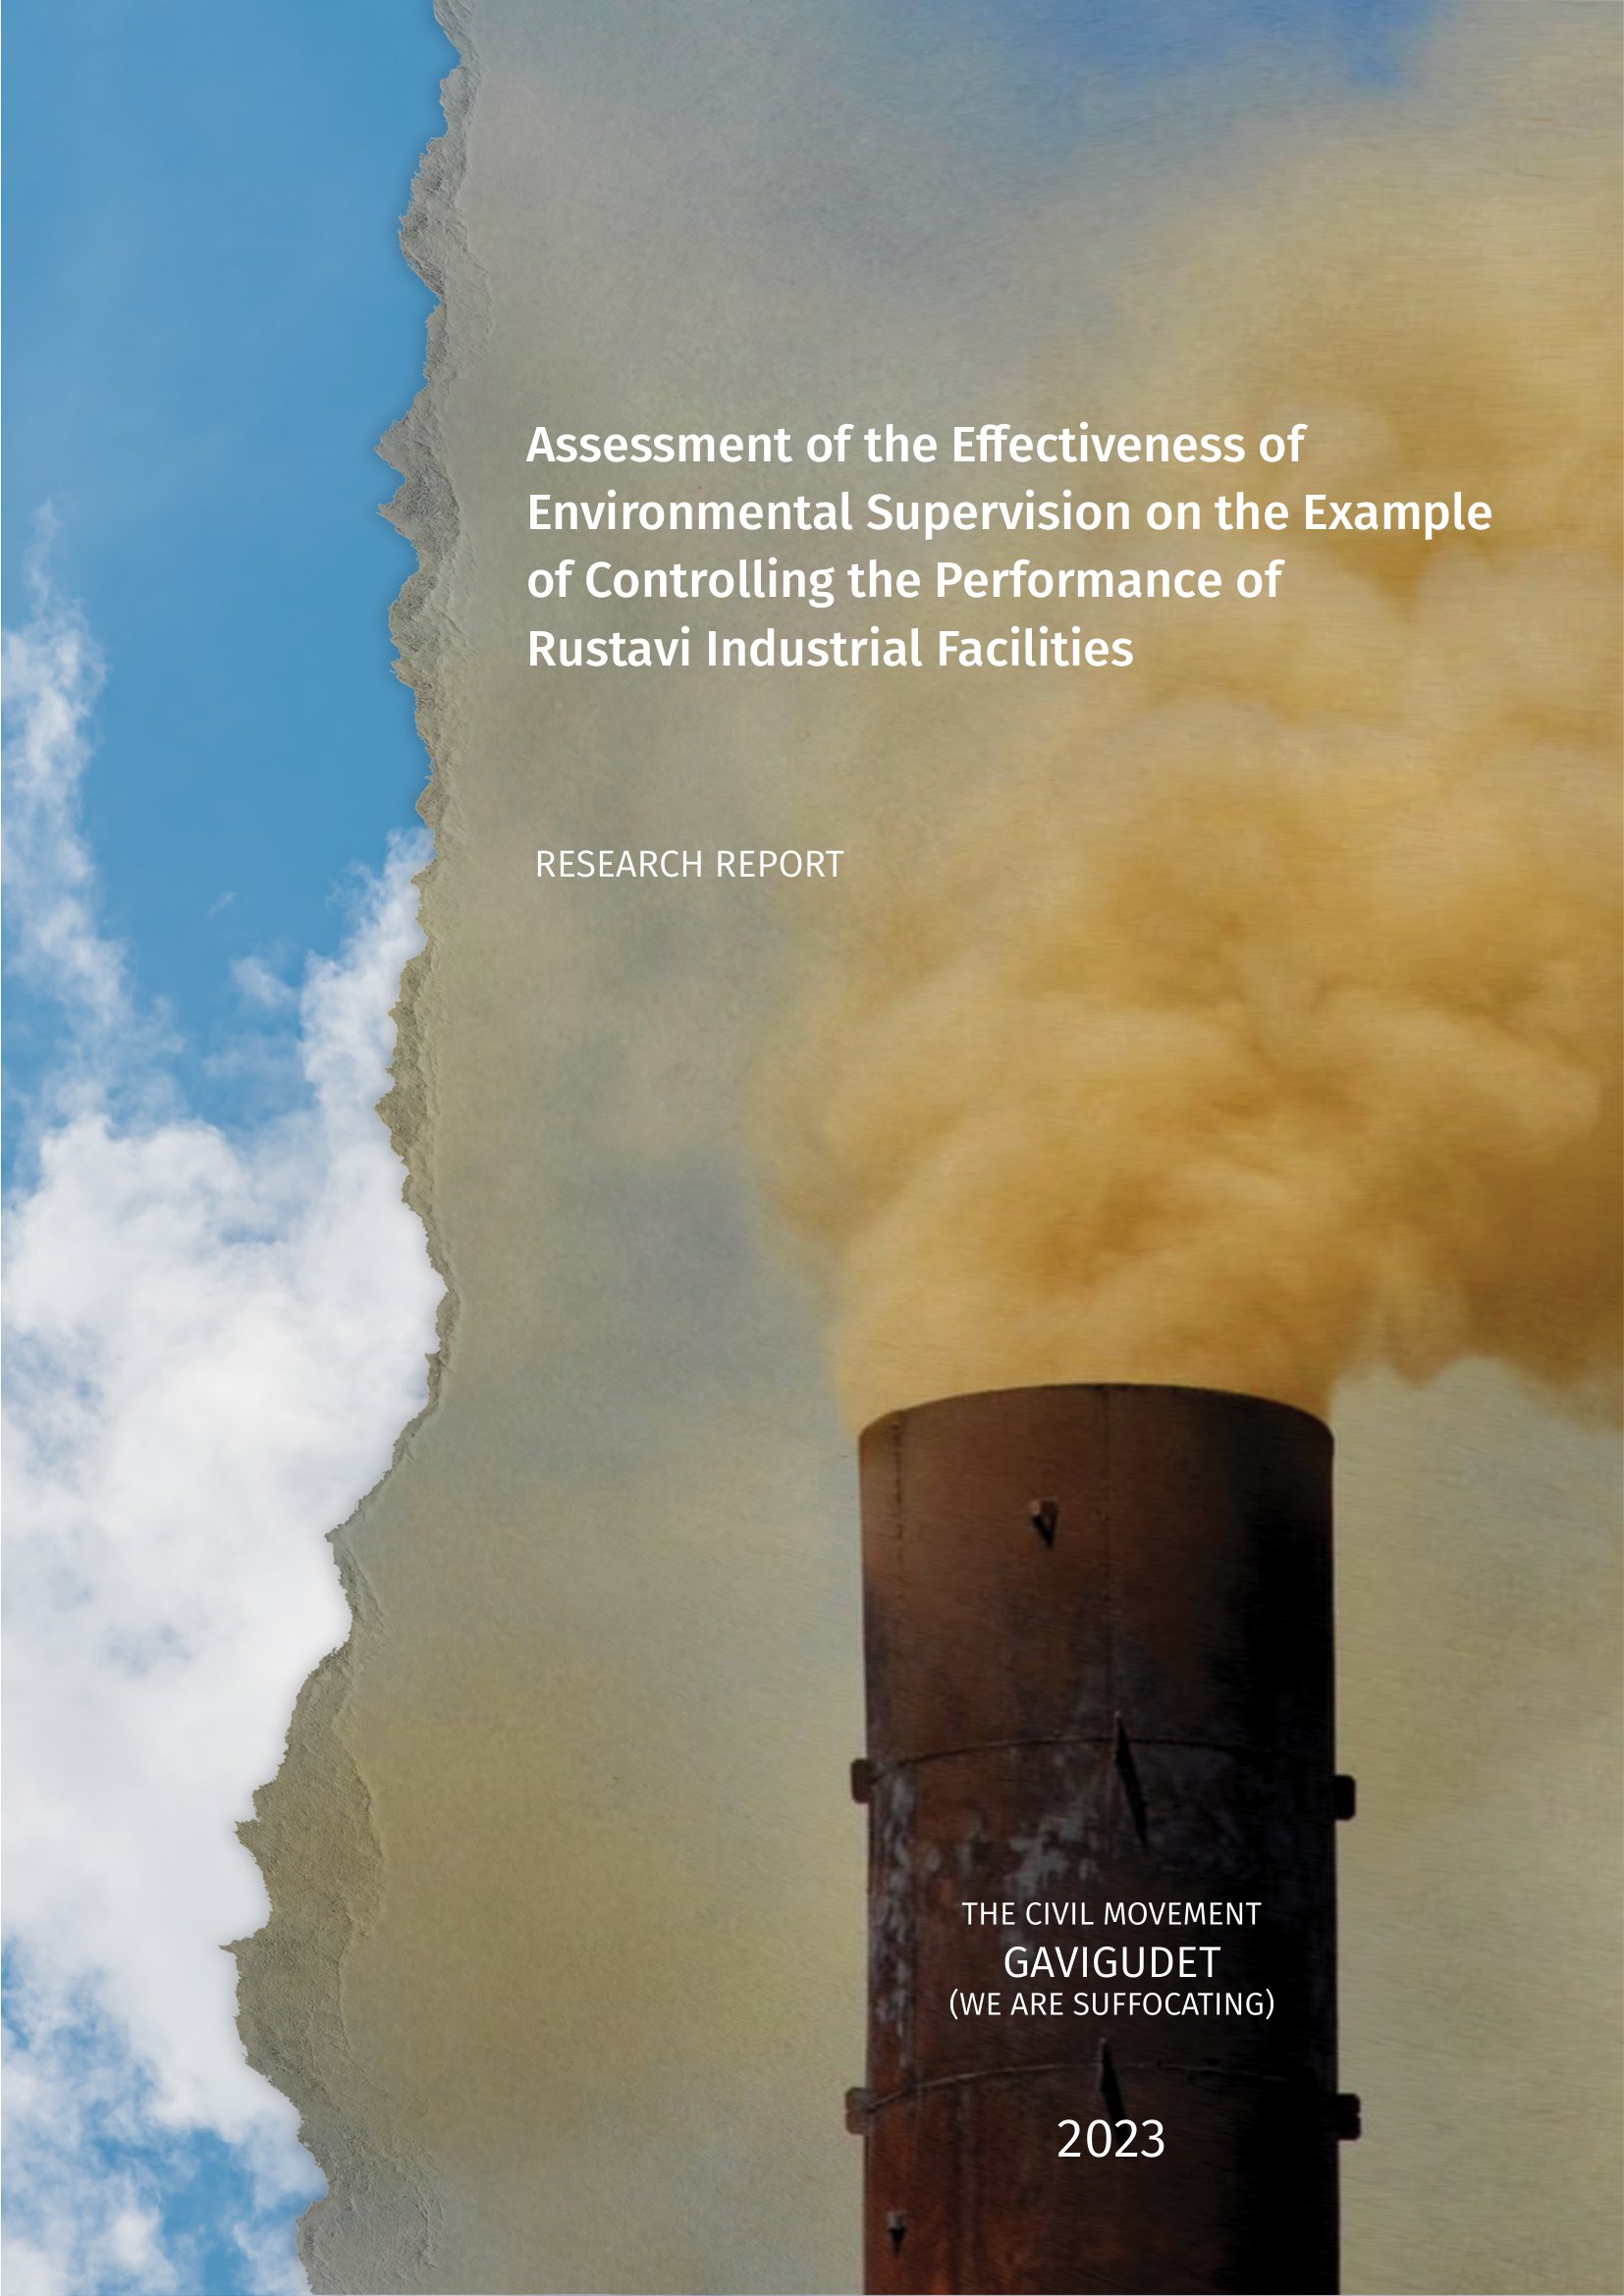 Assessment of the Effectiveness of Environmental Supervision on the Example of Controlling the Performance of Rustavi Industrial Facilities